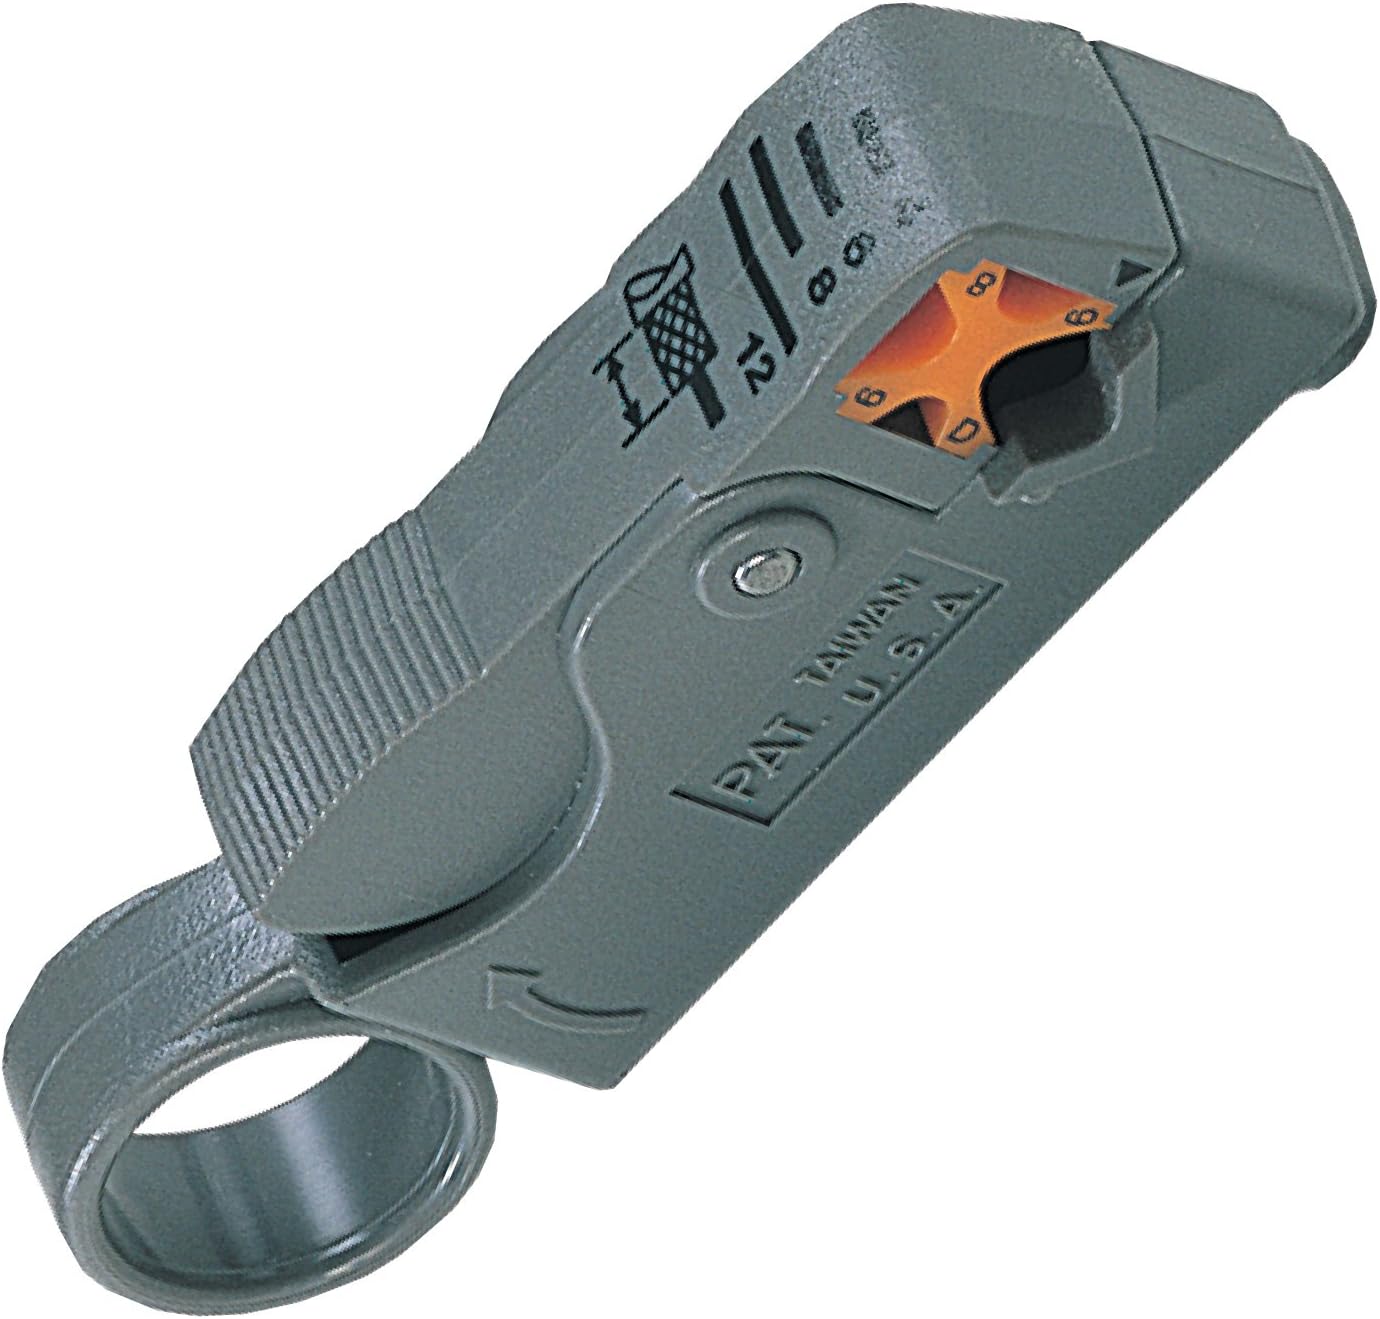 Pro'skit Rotating Coaxial Cable Stripper, Cable Stripper with Adjustable Blade for Coaxial Cables